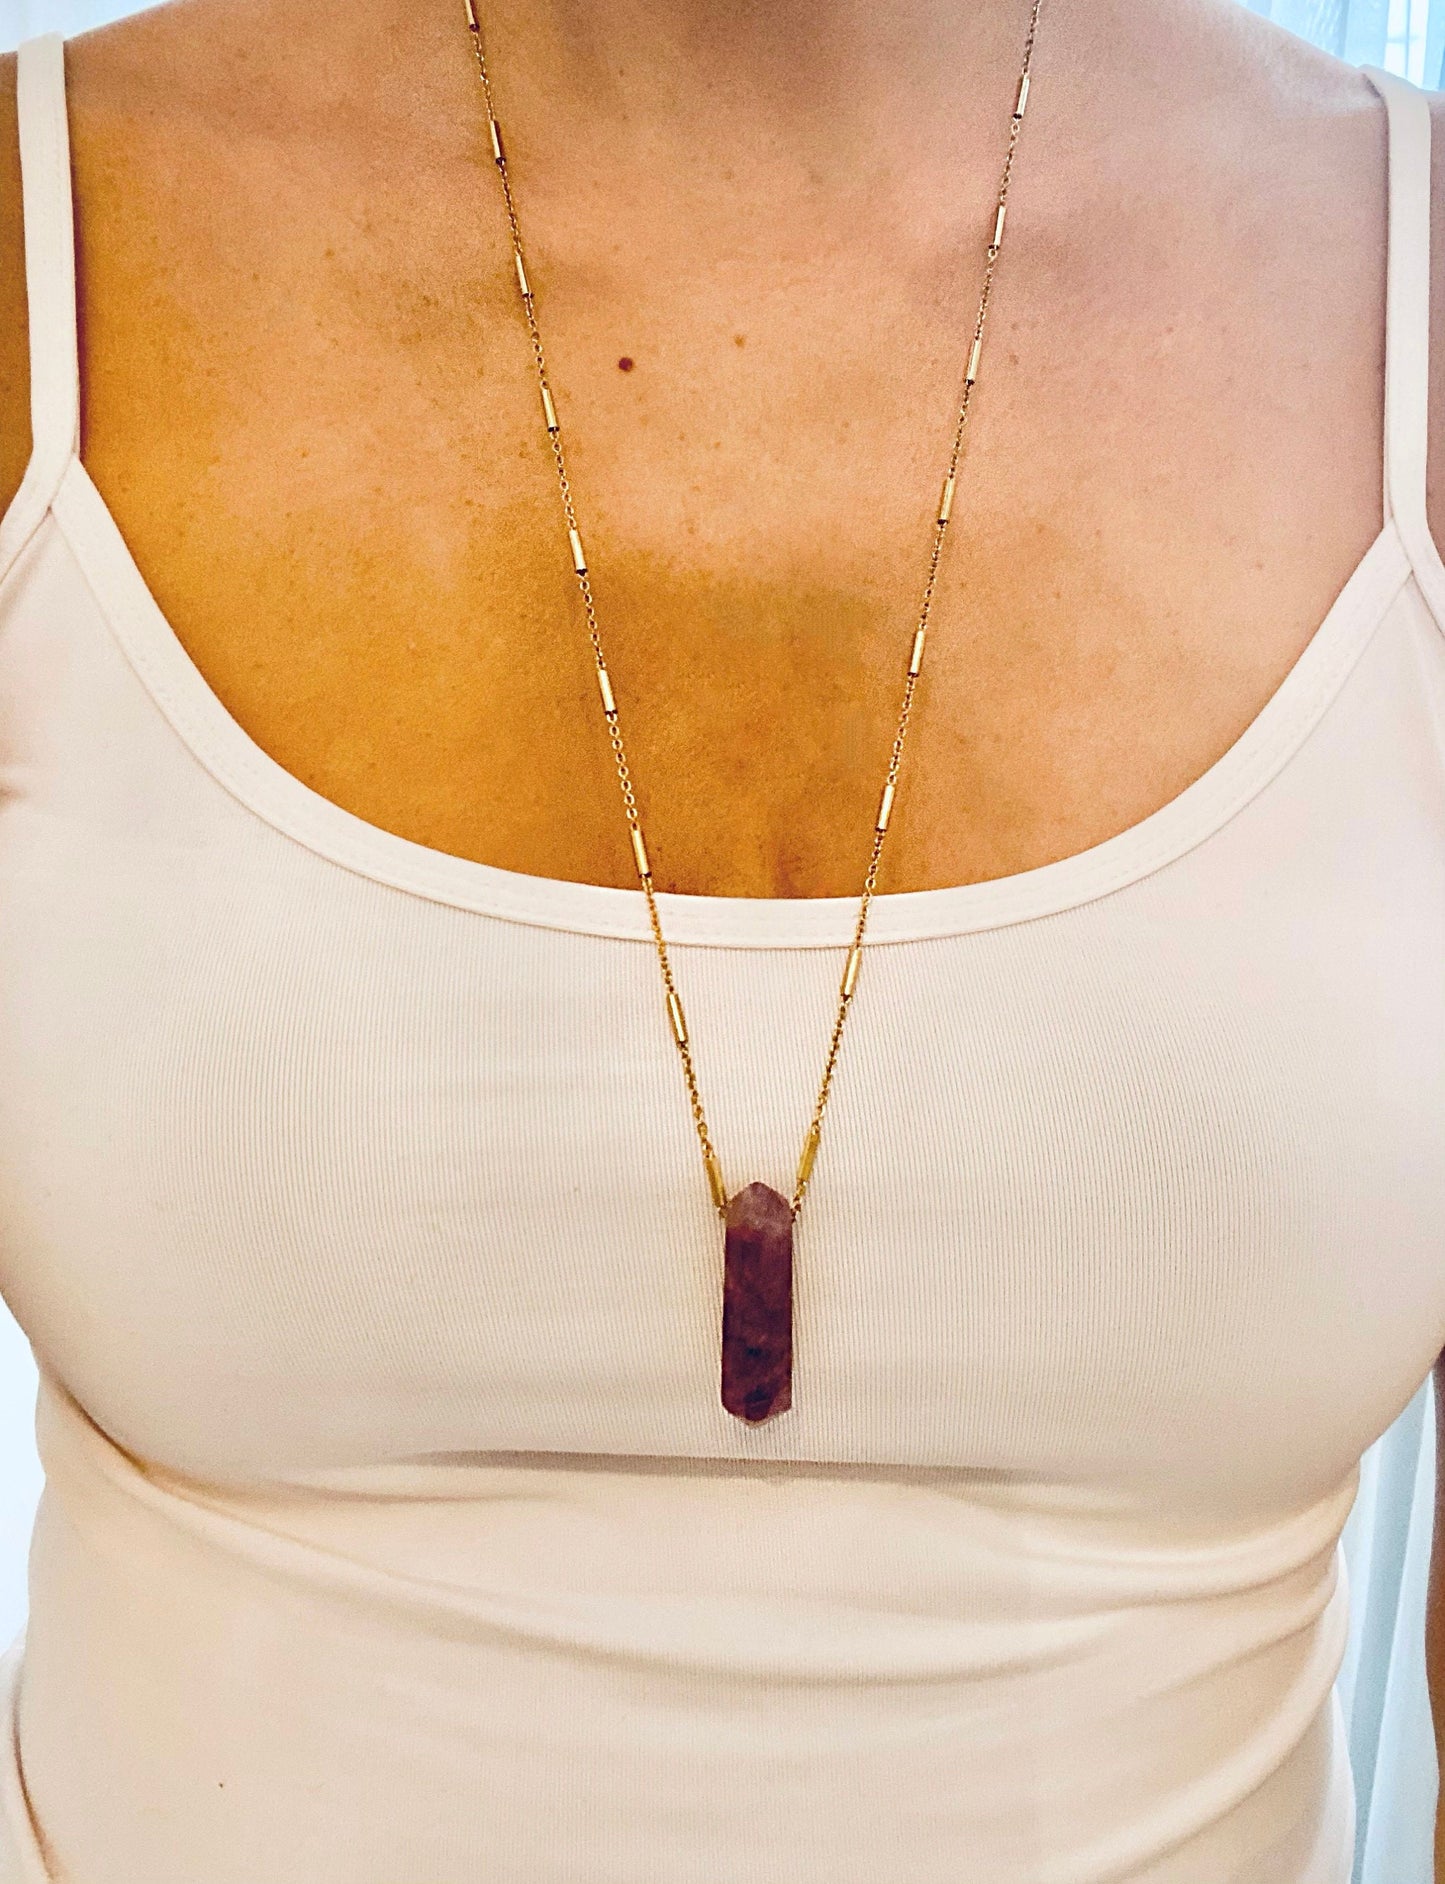 Long gold crystal necklace, satellite chain, stainless steel, prism pendant, amethyst natural stone necklace, healing necklace